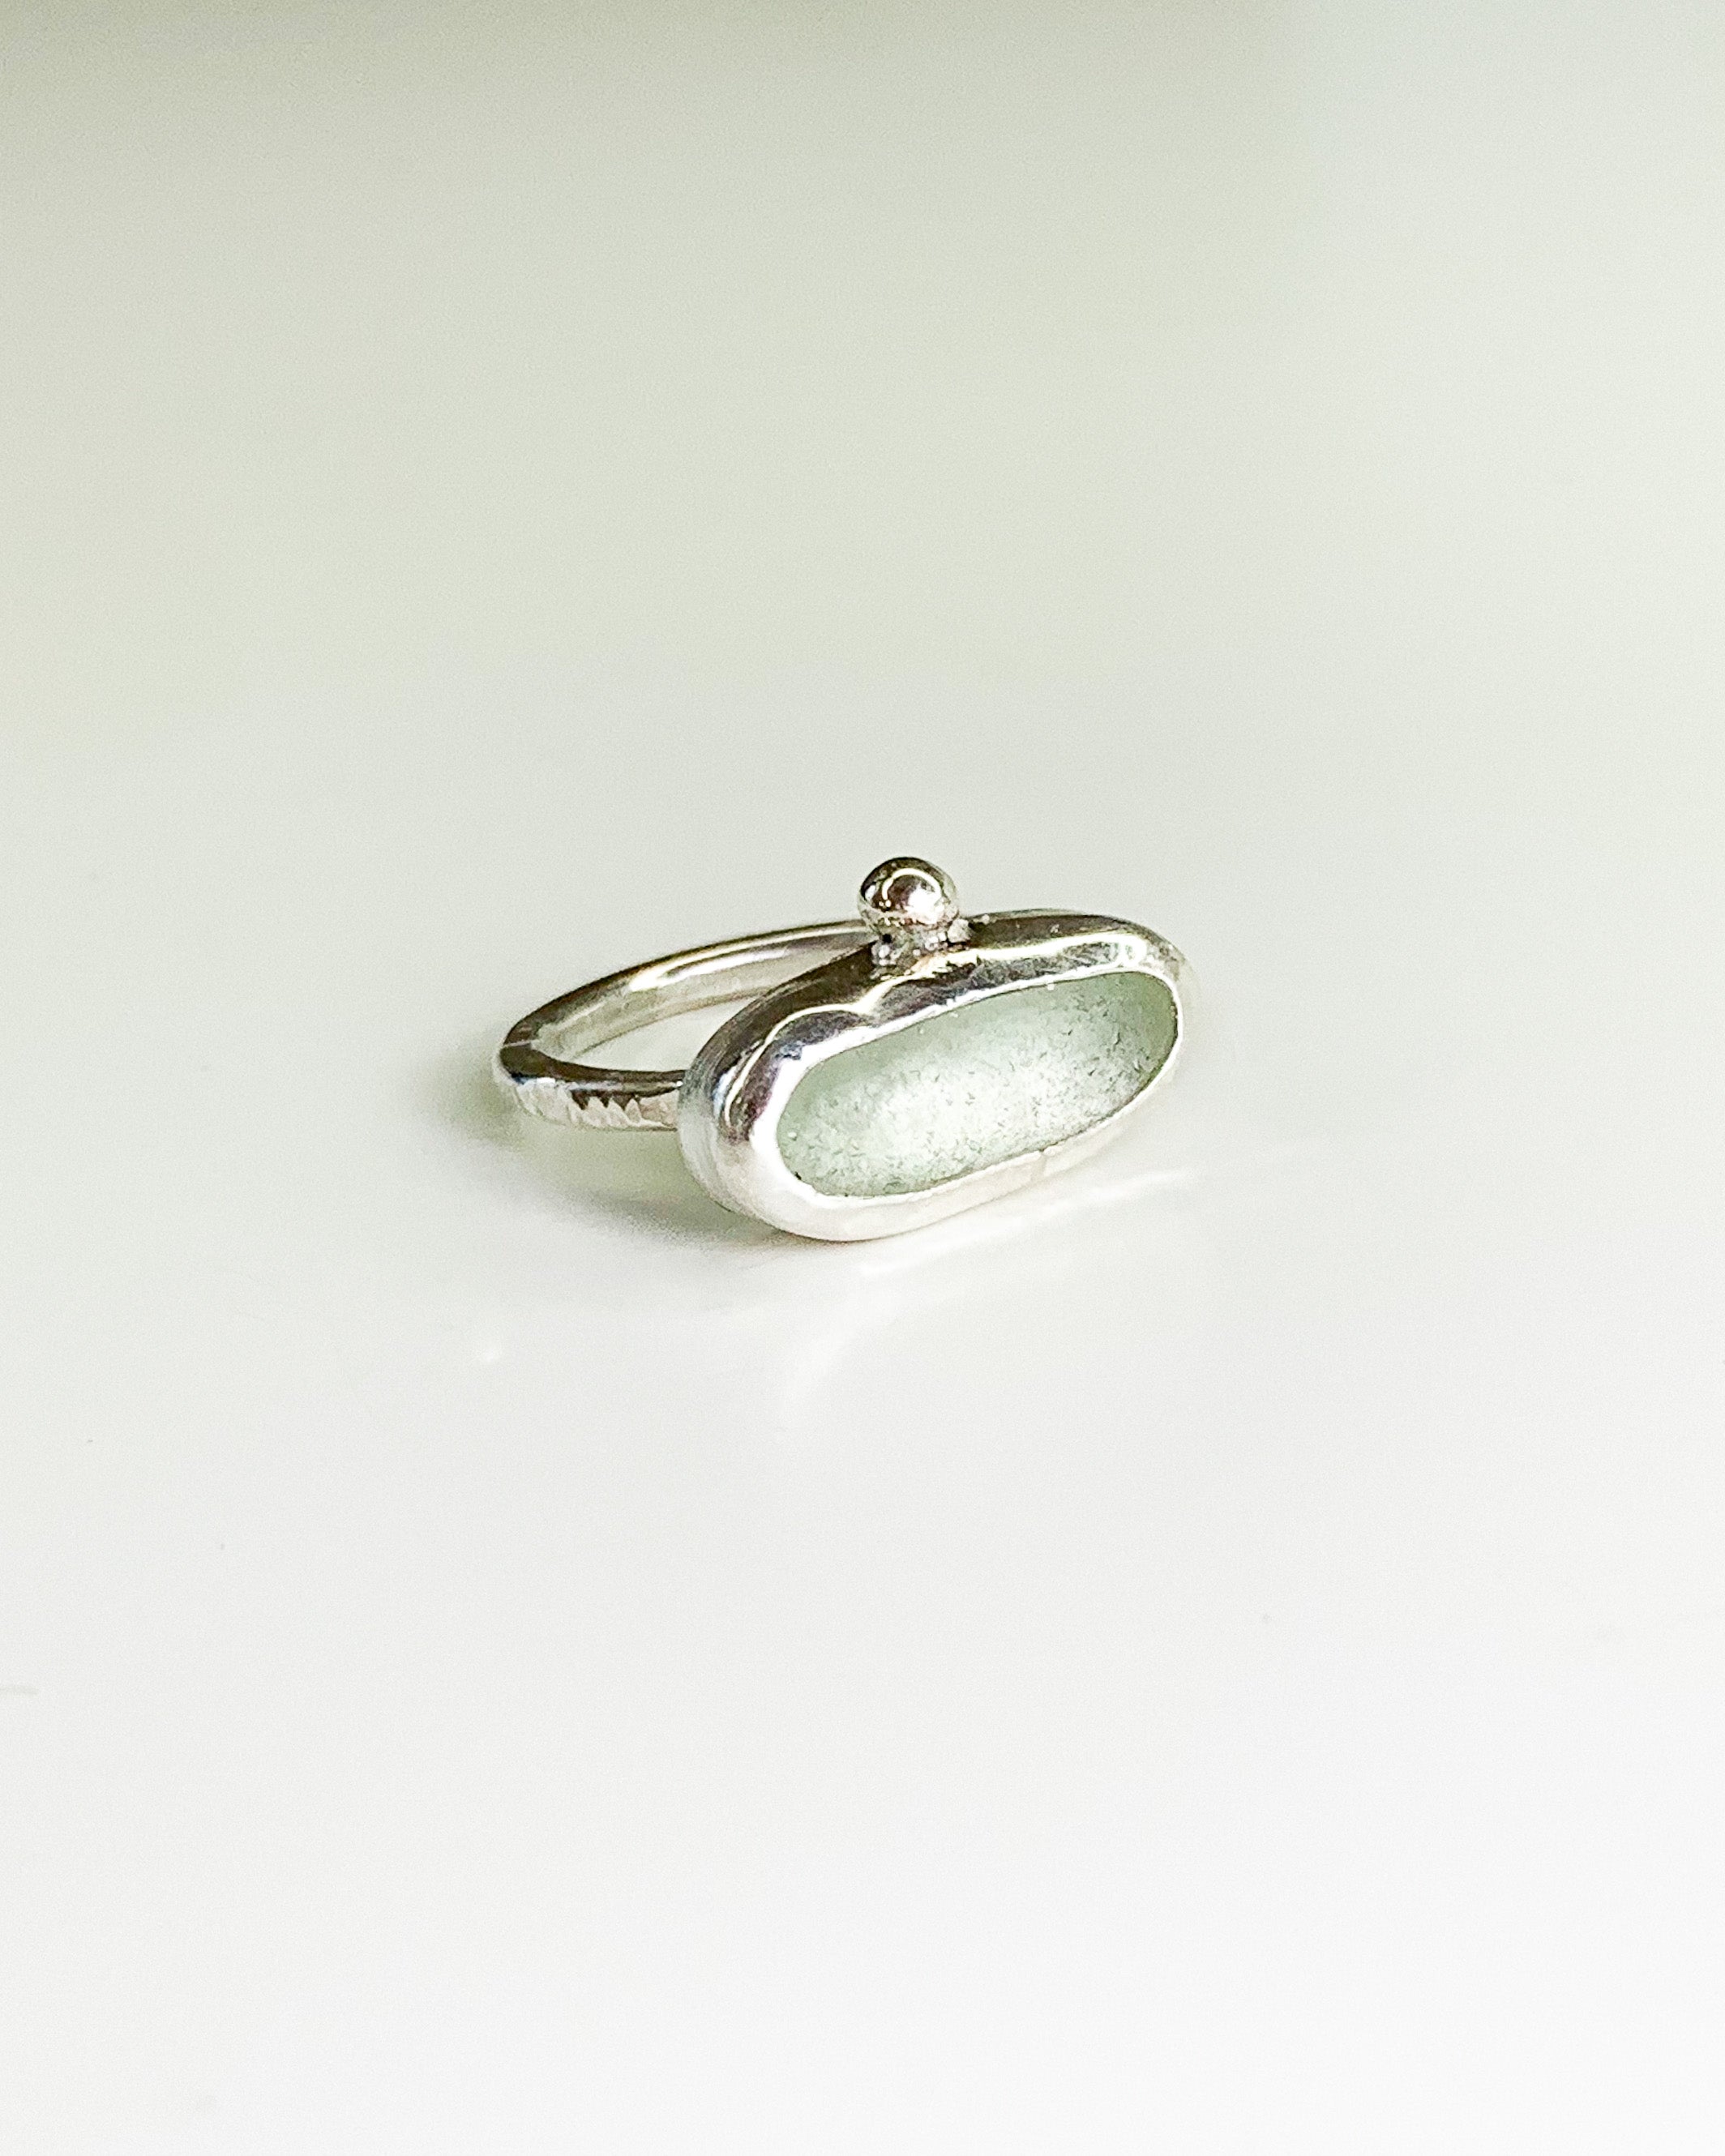 Beach glass ring - size 6.5